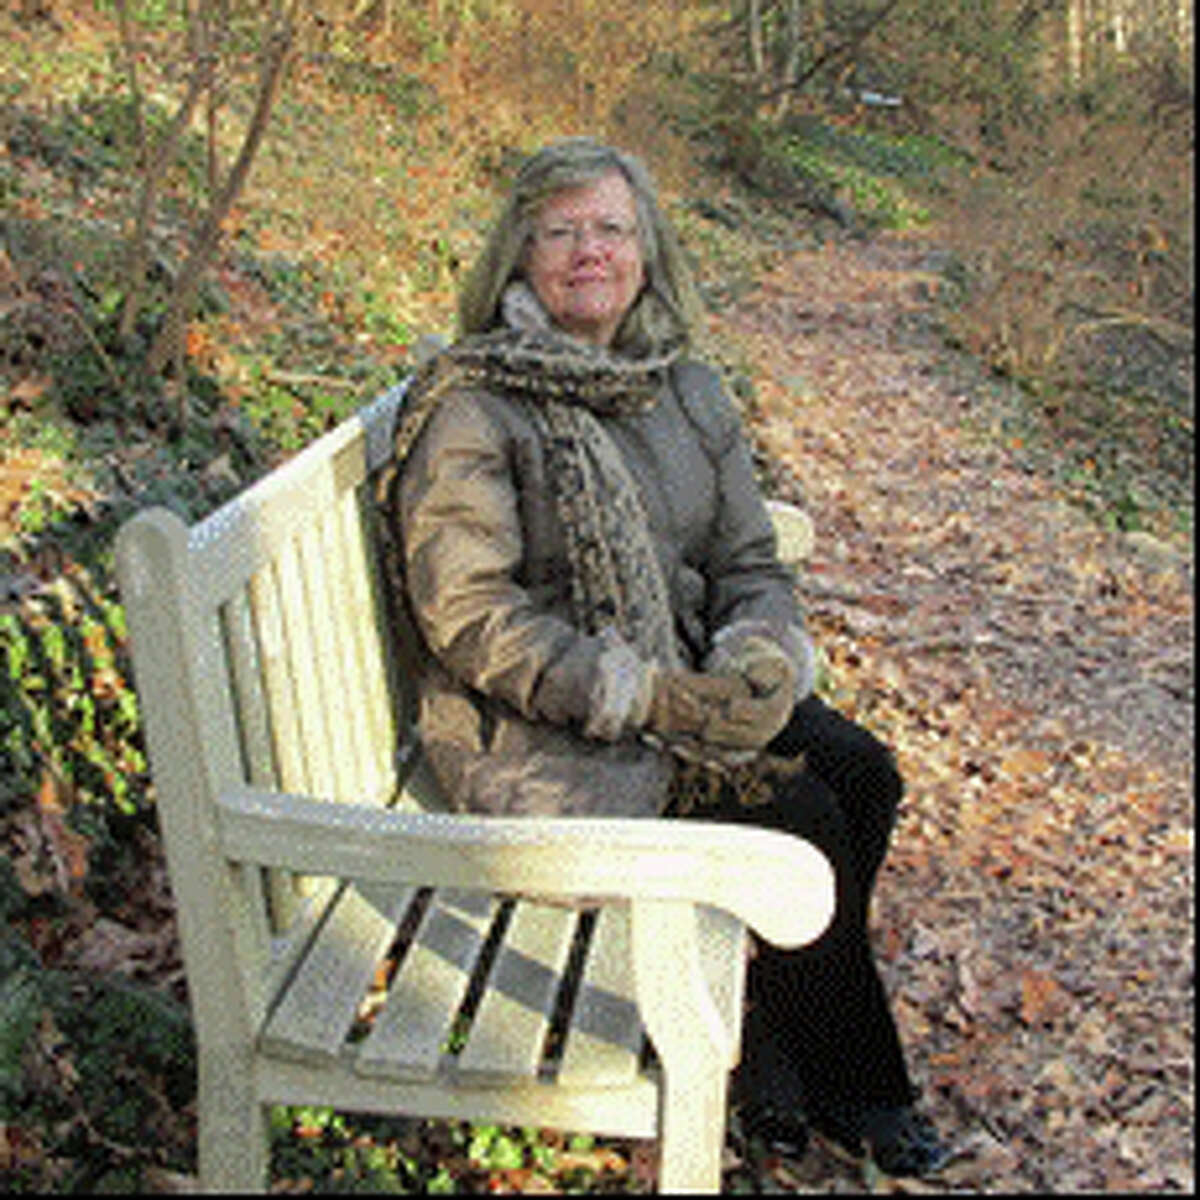 At the New Canaan Beautification League's meeting on Wednesday, Jan. 9, Faith Kerchoff, a longtime residen, will present a history of the history of the George Lee Memorial Garden.